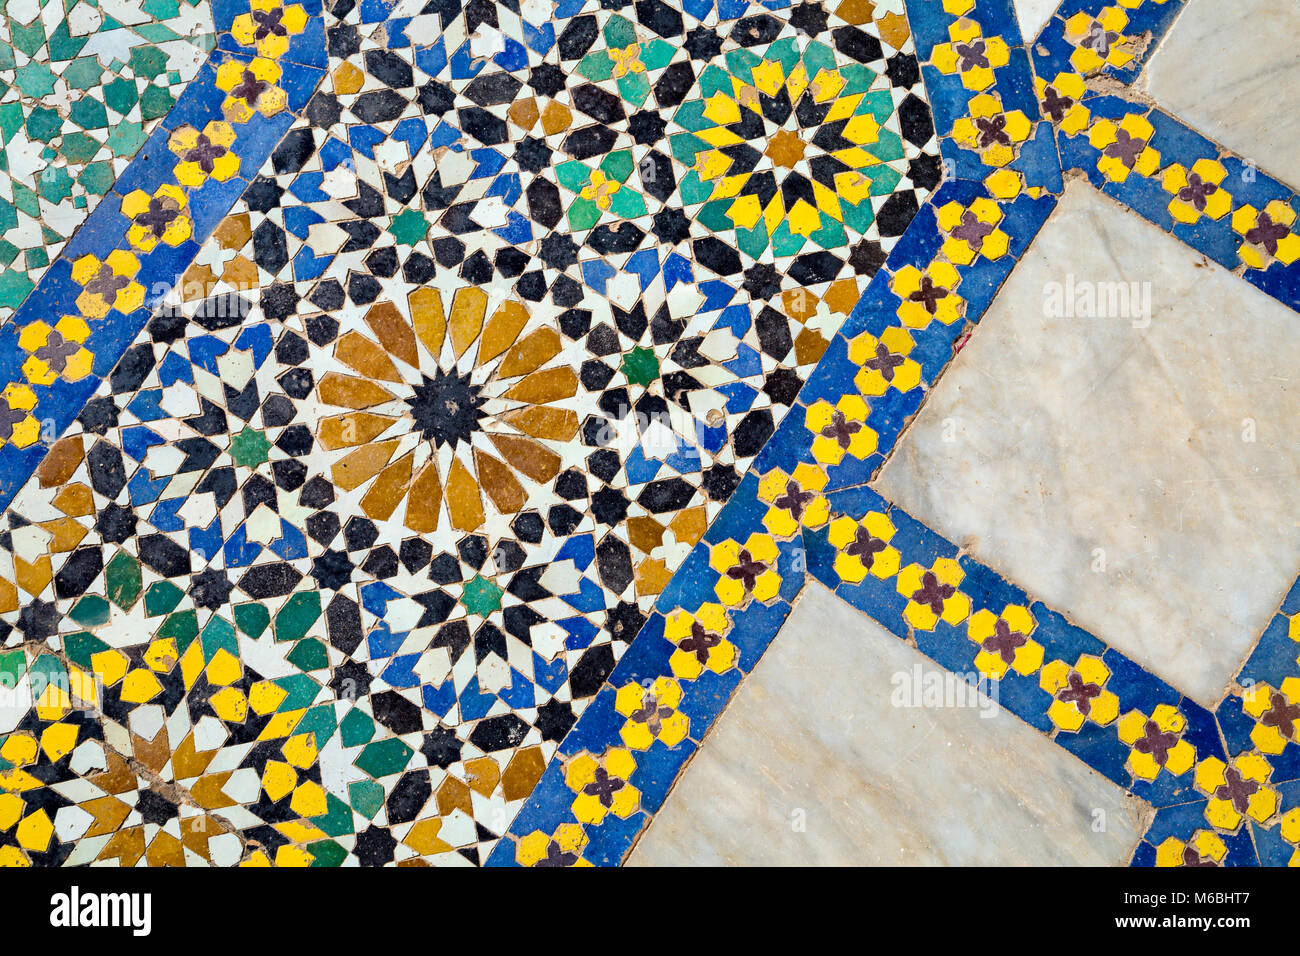 Colourful Moroccan mosaic tiles in Fes, Morocco Stock Photo